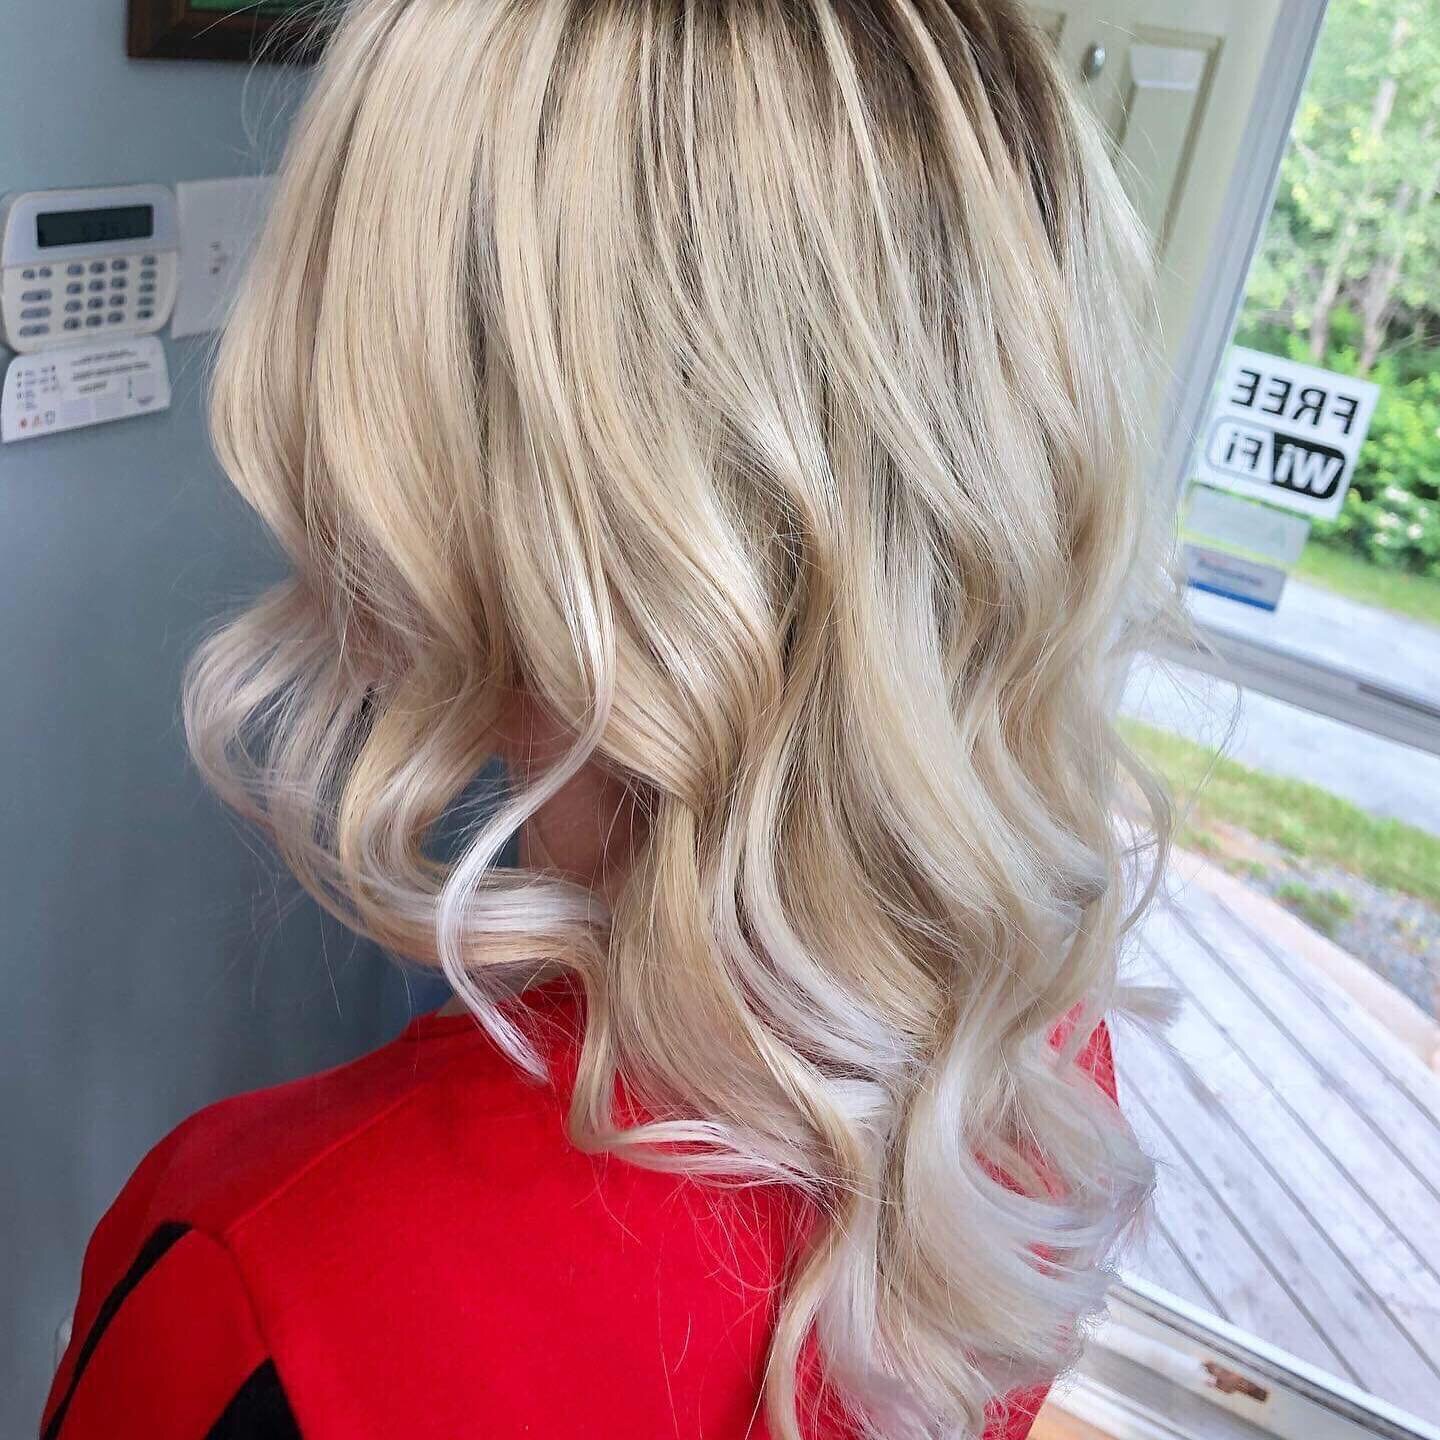 some lovely highlights and blondes Jessica has been working on lately. Need a pick me up book with Jess for some colour #hairbyjess #blonde #highlights #summerhair #curls